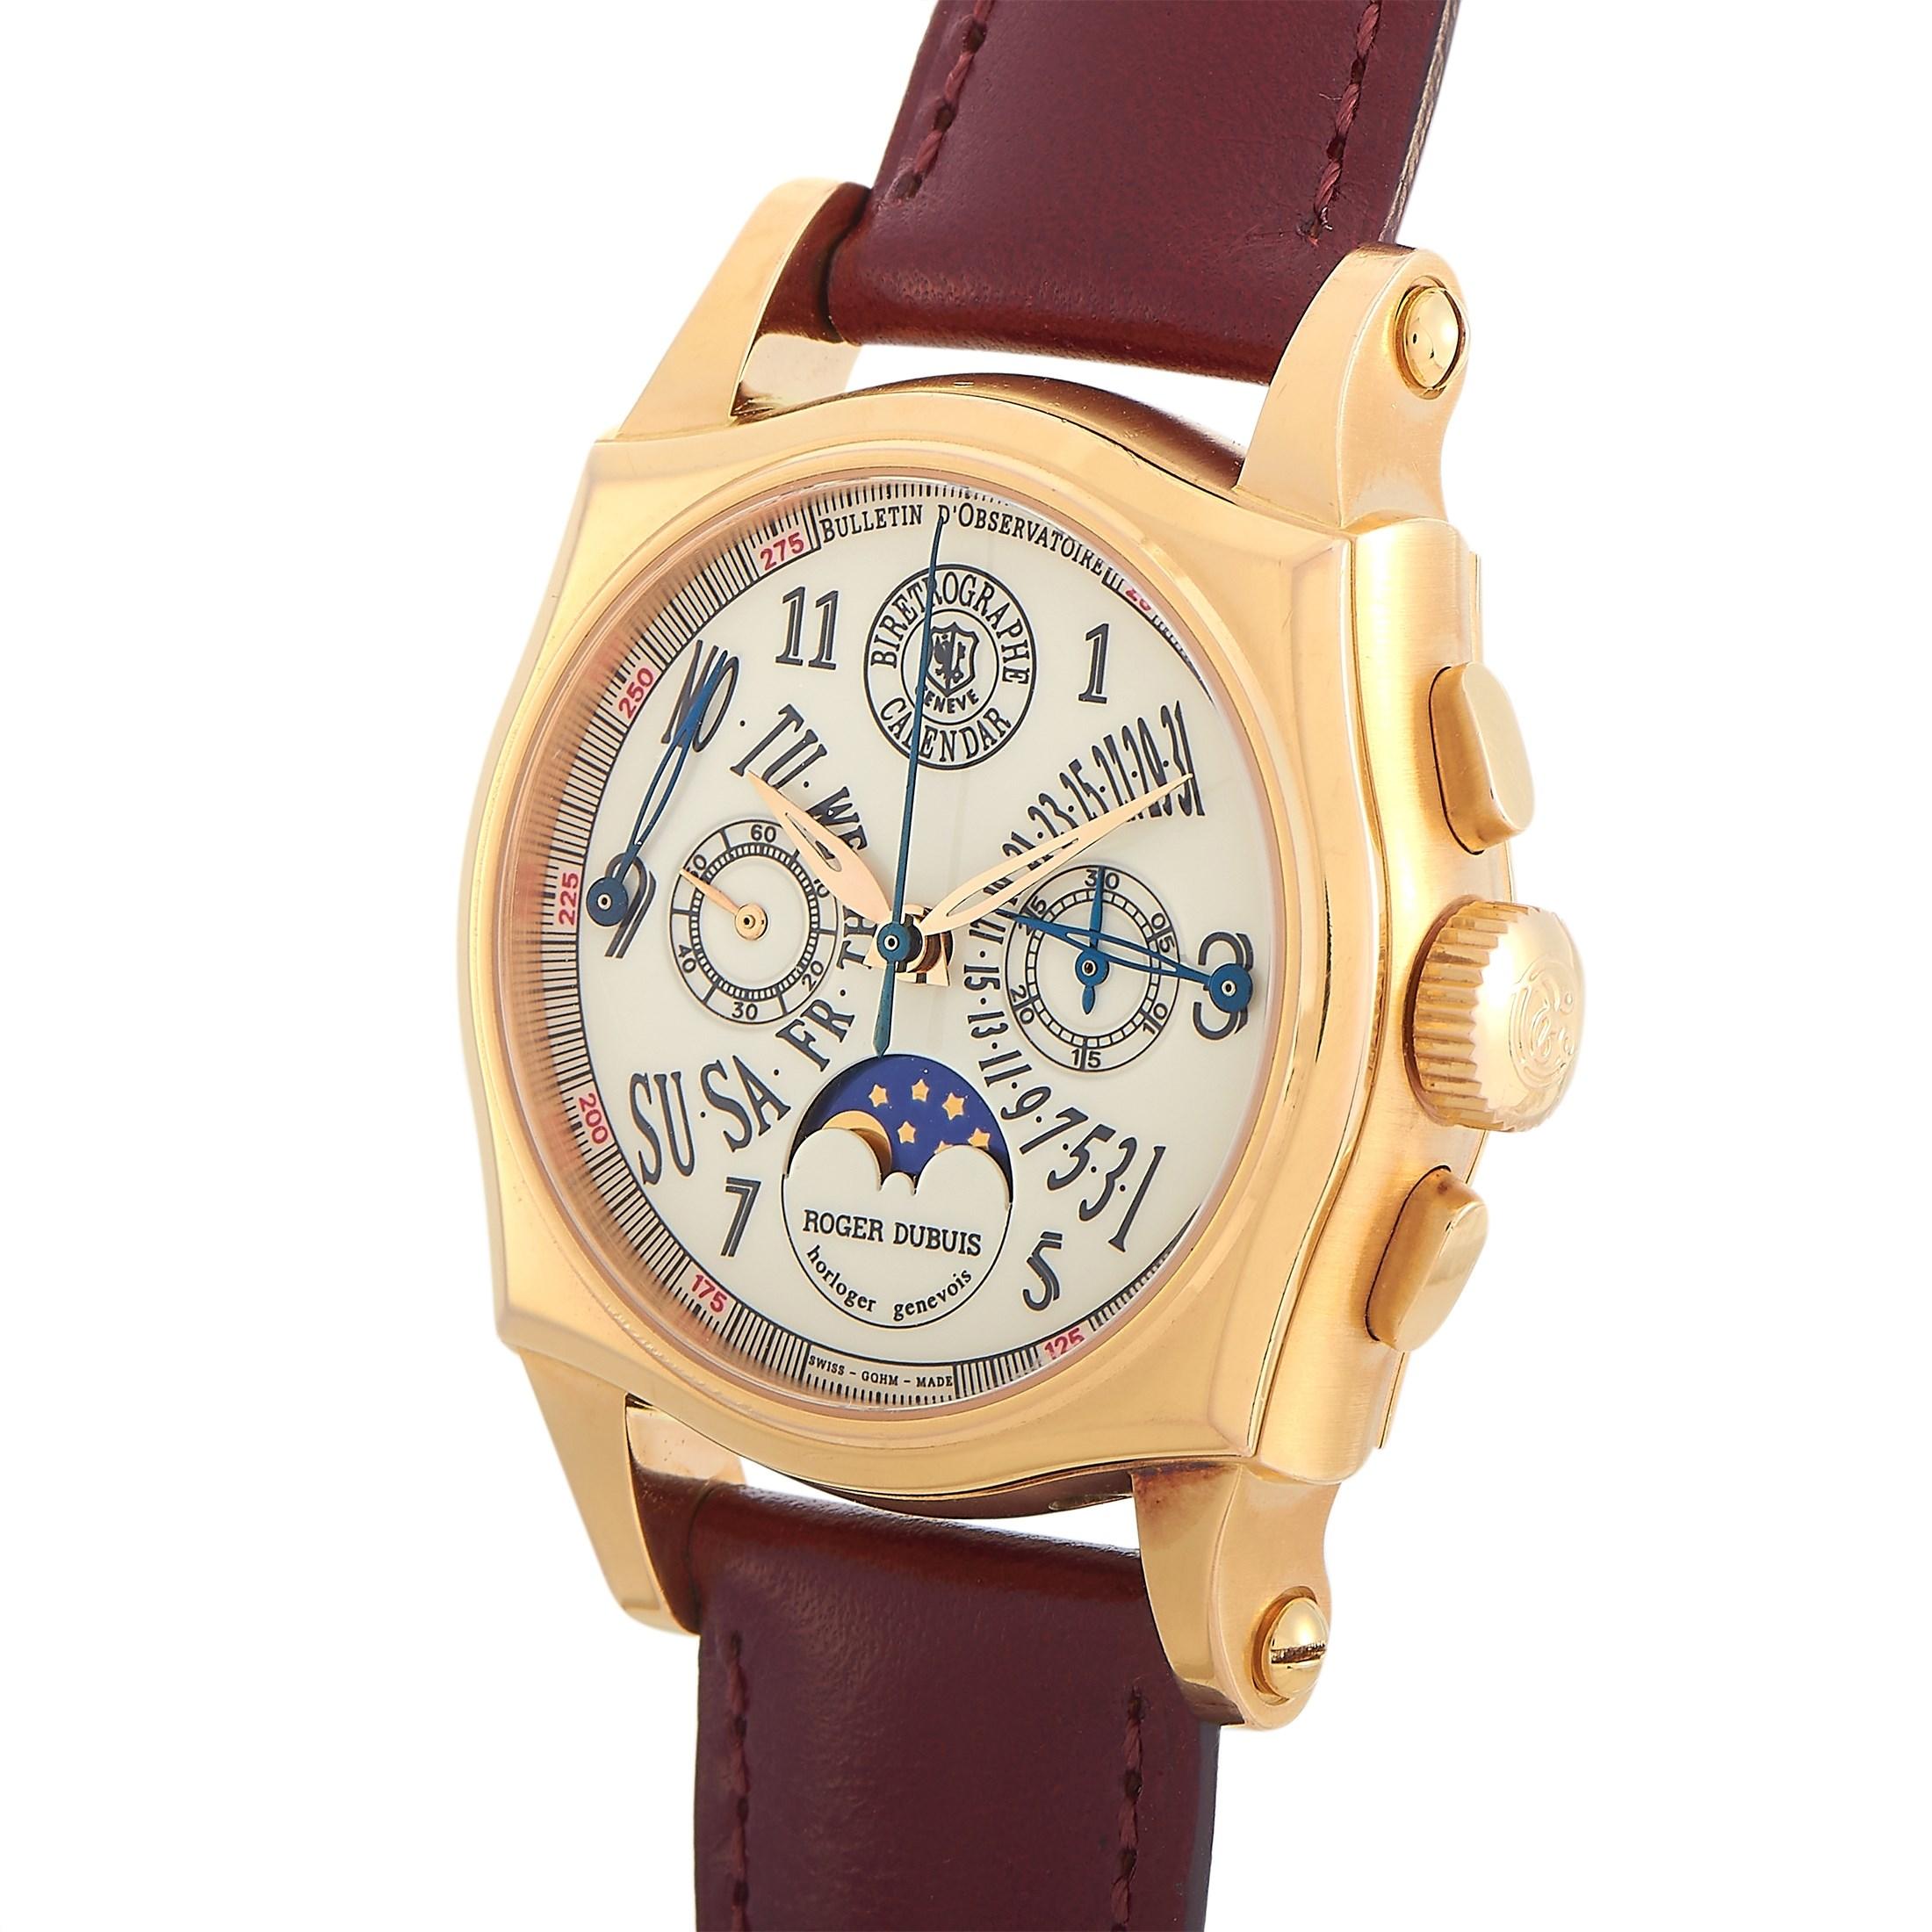 Here is your chance to update your watch collection with an ultra-rare timepiece from the master of complications. This Roger Dubuis Sympathie Bi-Retrograde Chronograph Moonphase Watch S37563555.6 is fashioned in 18K rose gold and features a